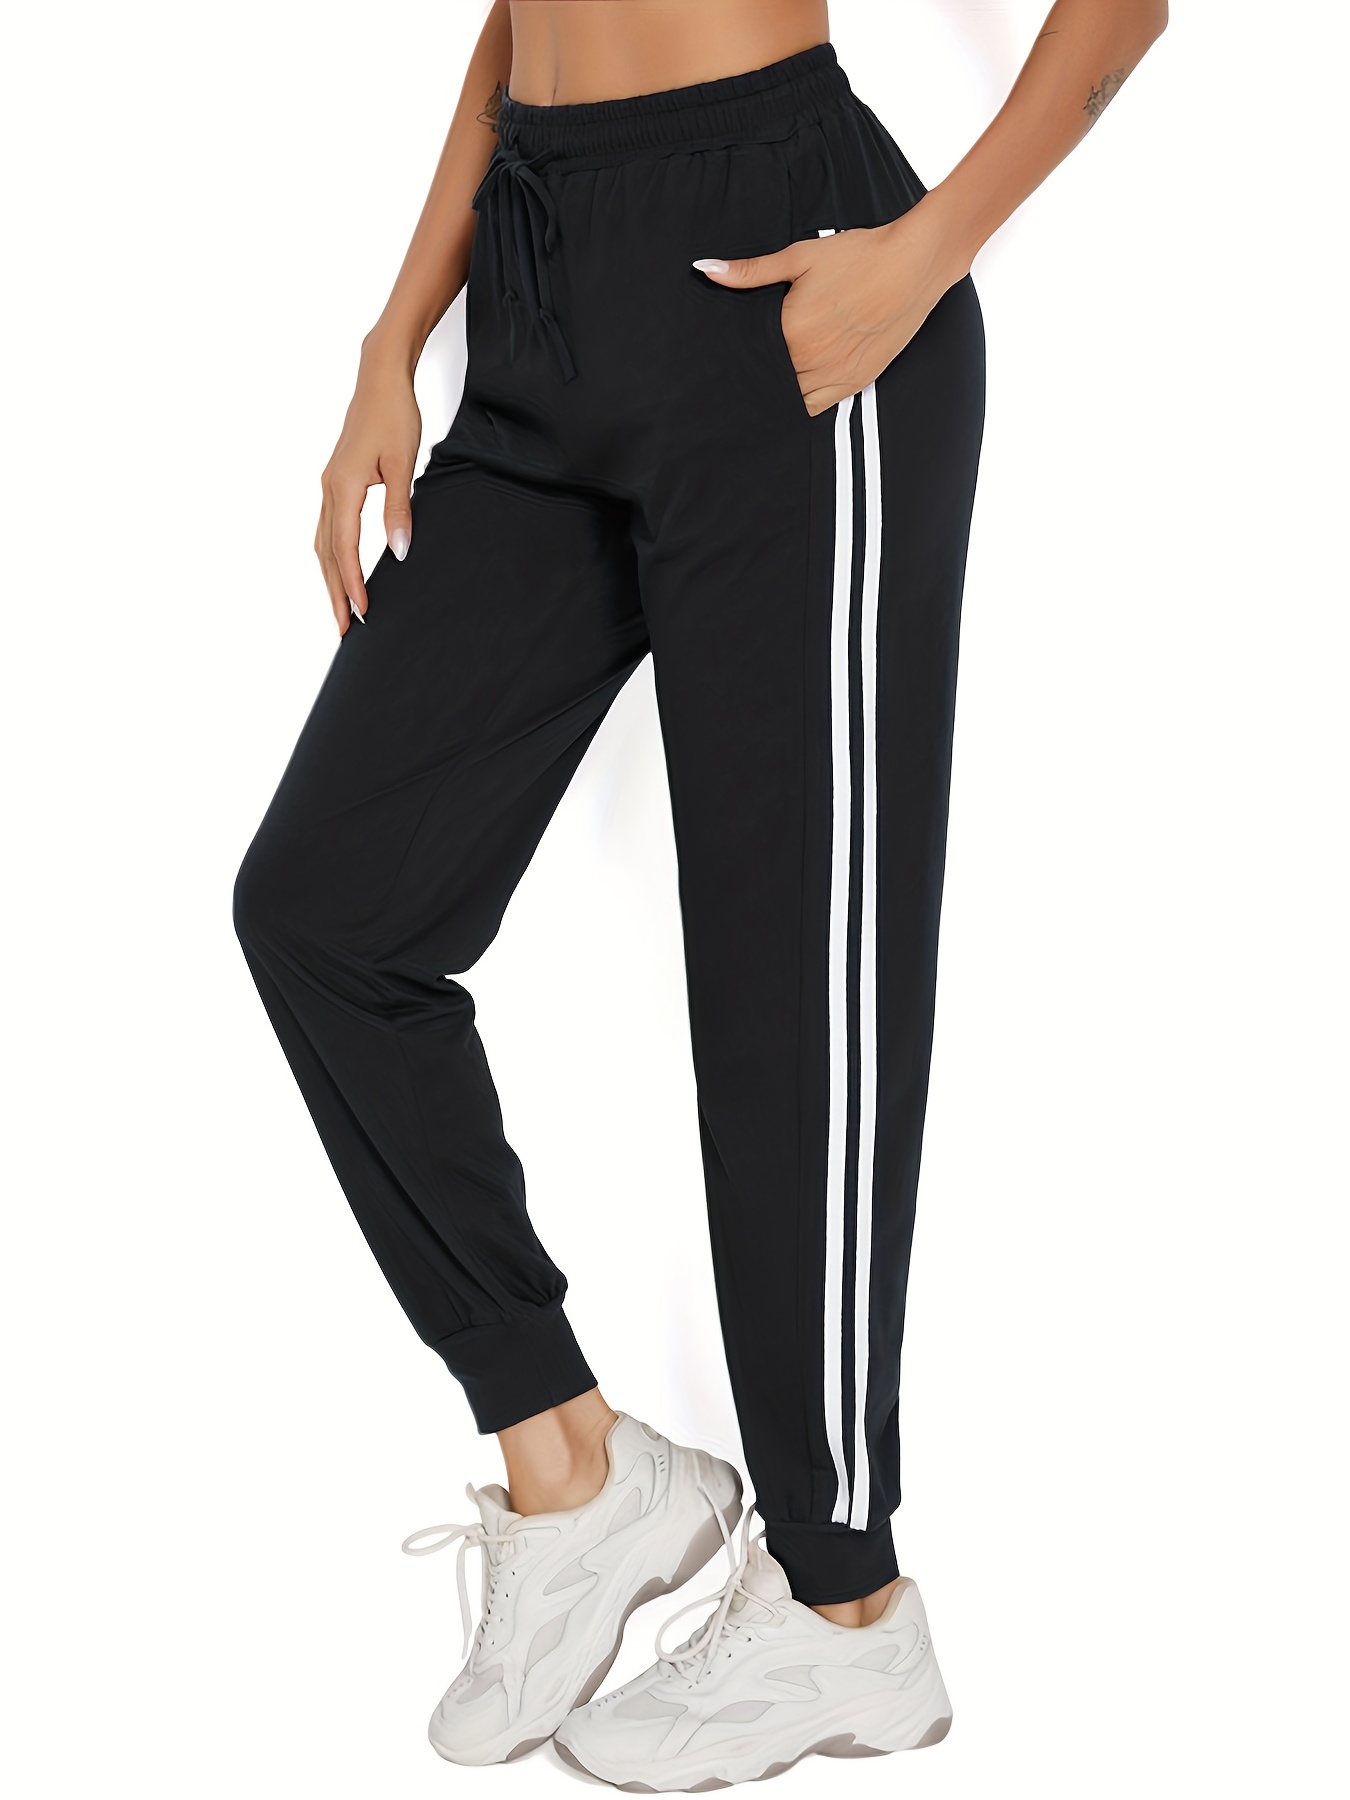  Women's Bottom Sweatpants Joggers Pants Workout High Waisted  Yoga Lounge Pant with Pockets 2x Exercise Pants (Dark Gray, XL) : Clothing,  Shoes & Jewelry